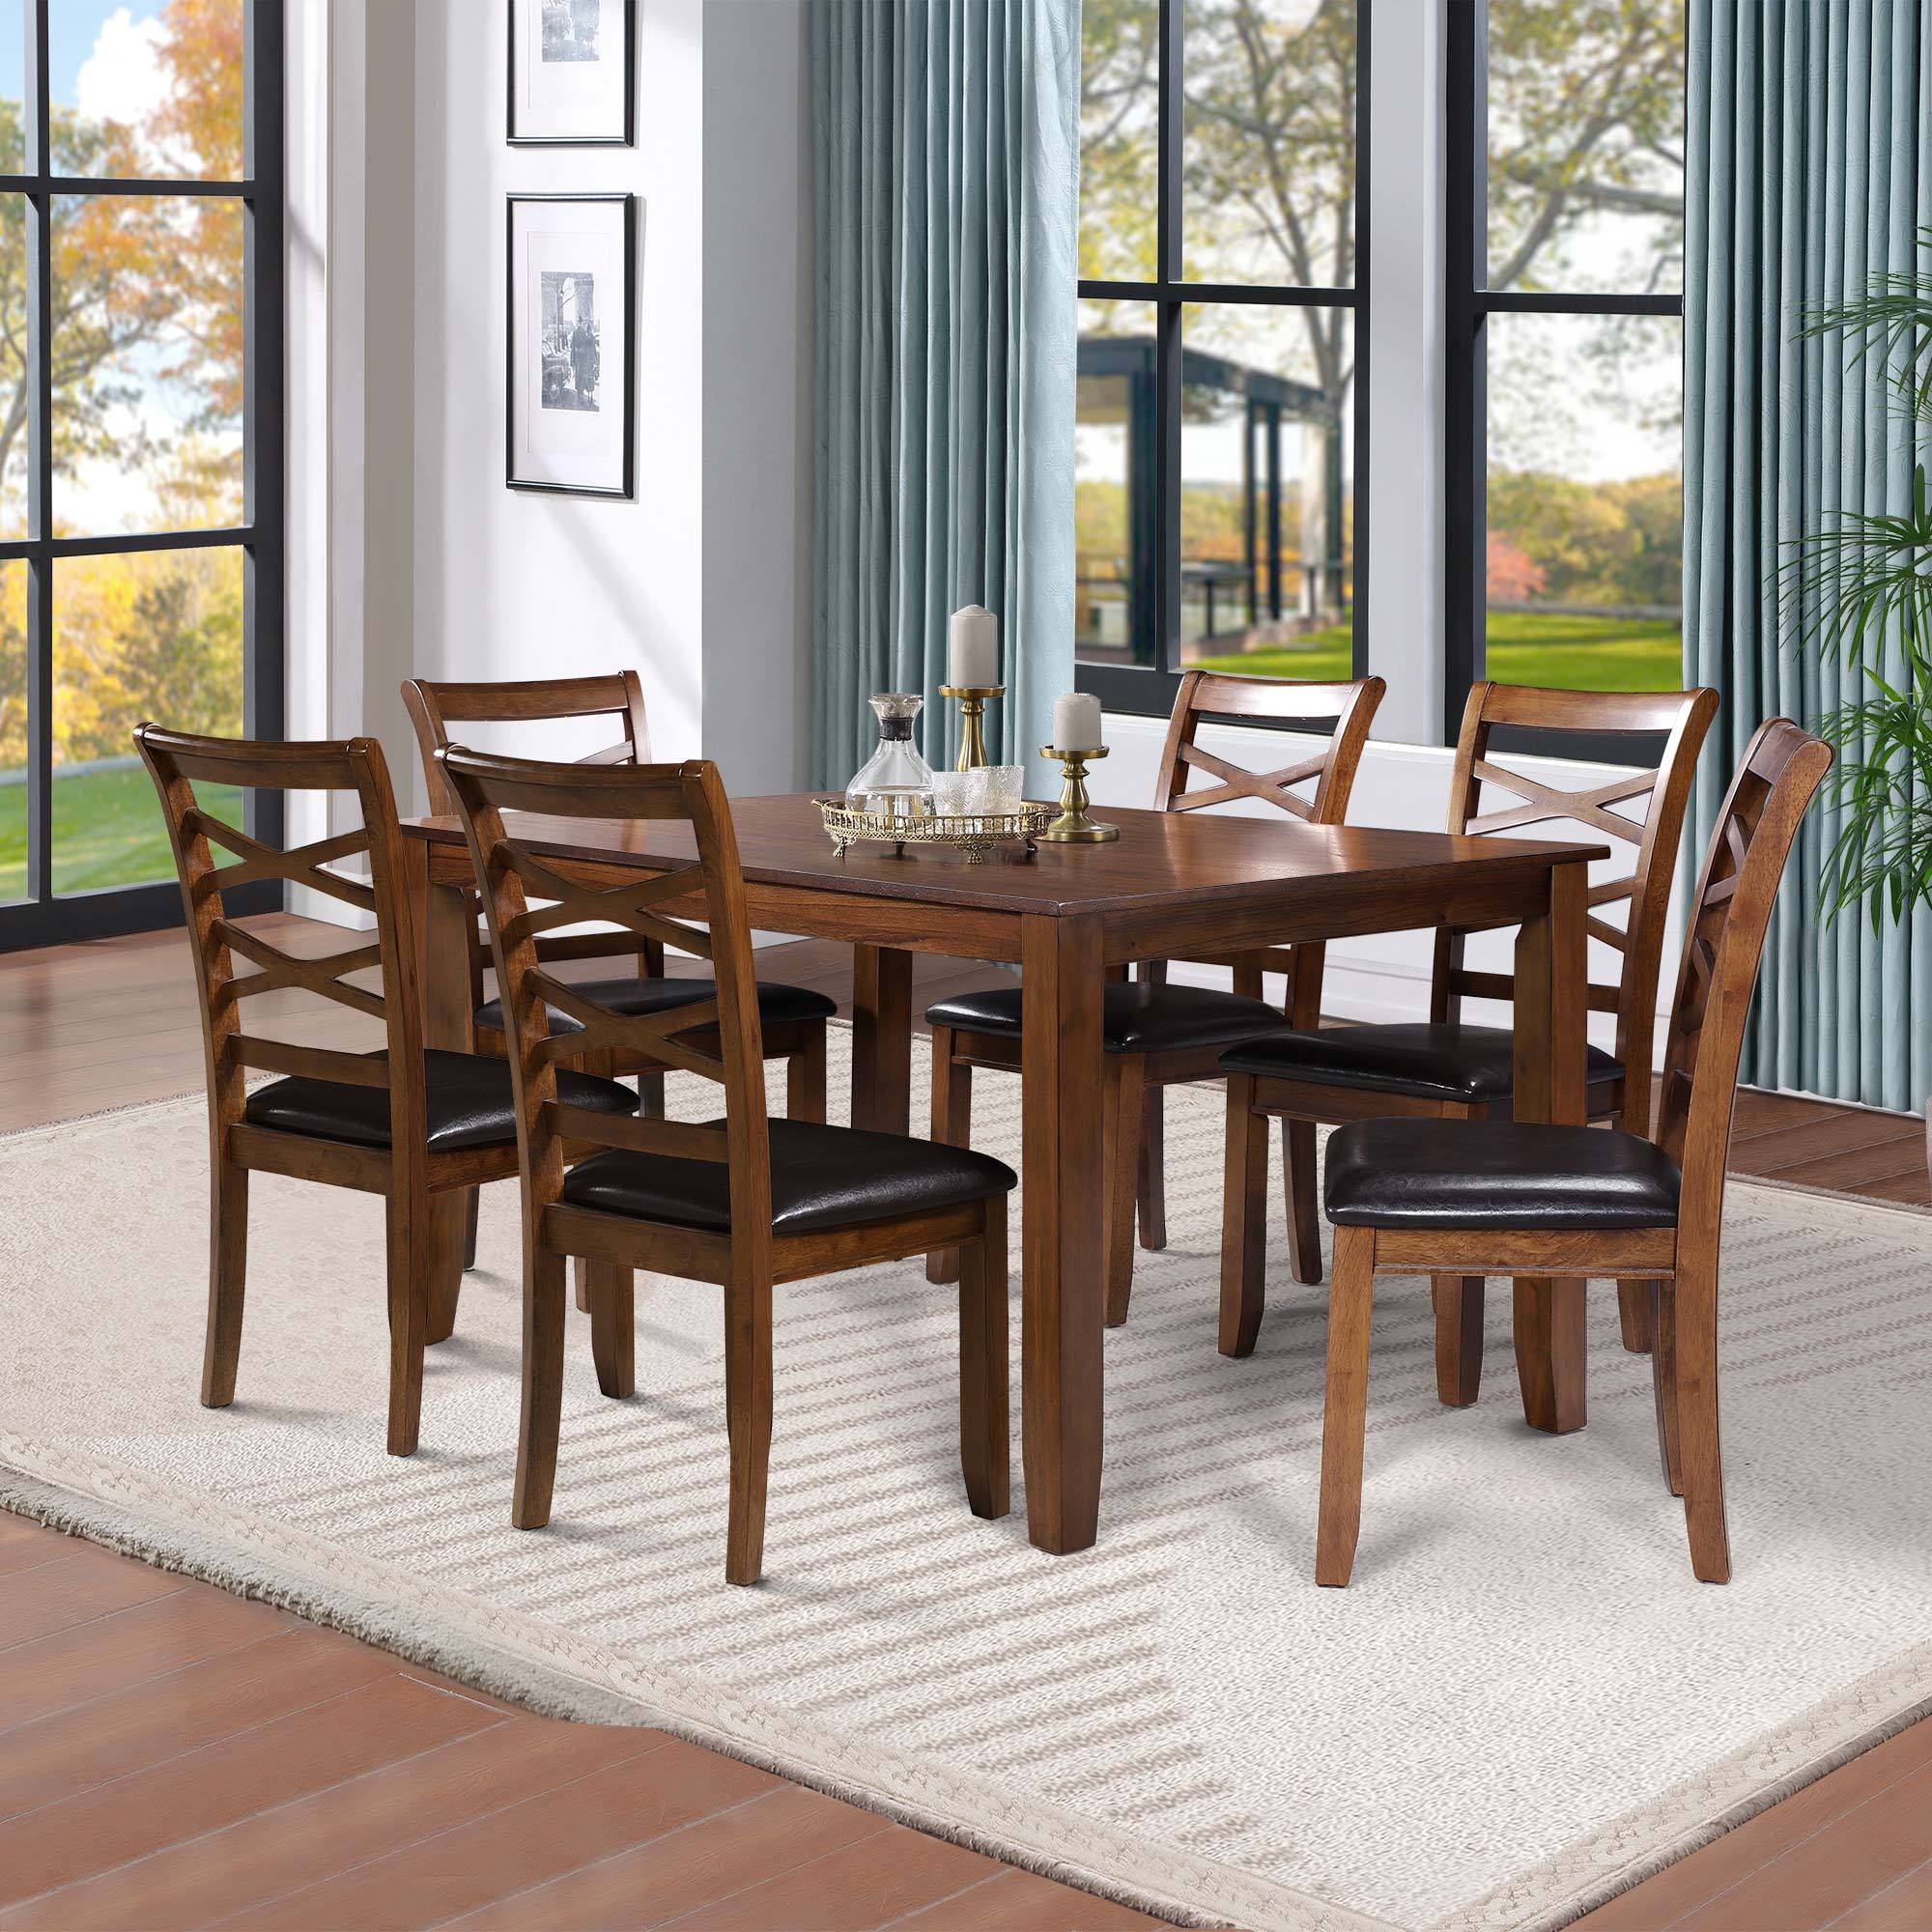 9-Piece Dining Table Set Wood Rectangular Table and 8 Dining Chairs - Natural Walnut